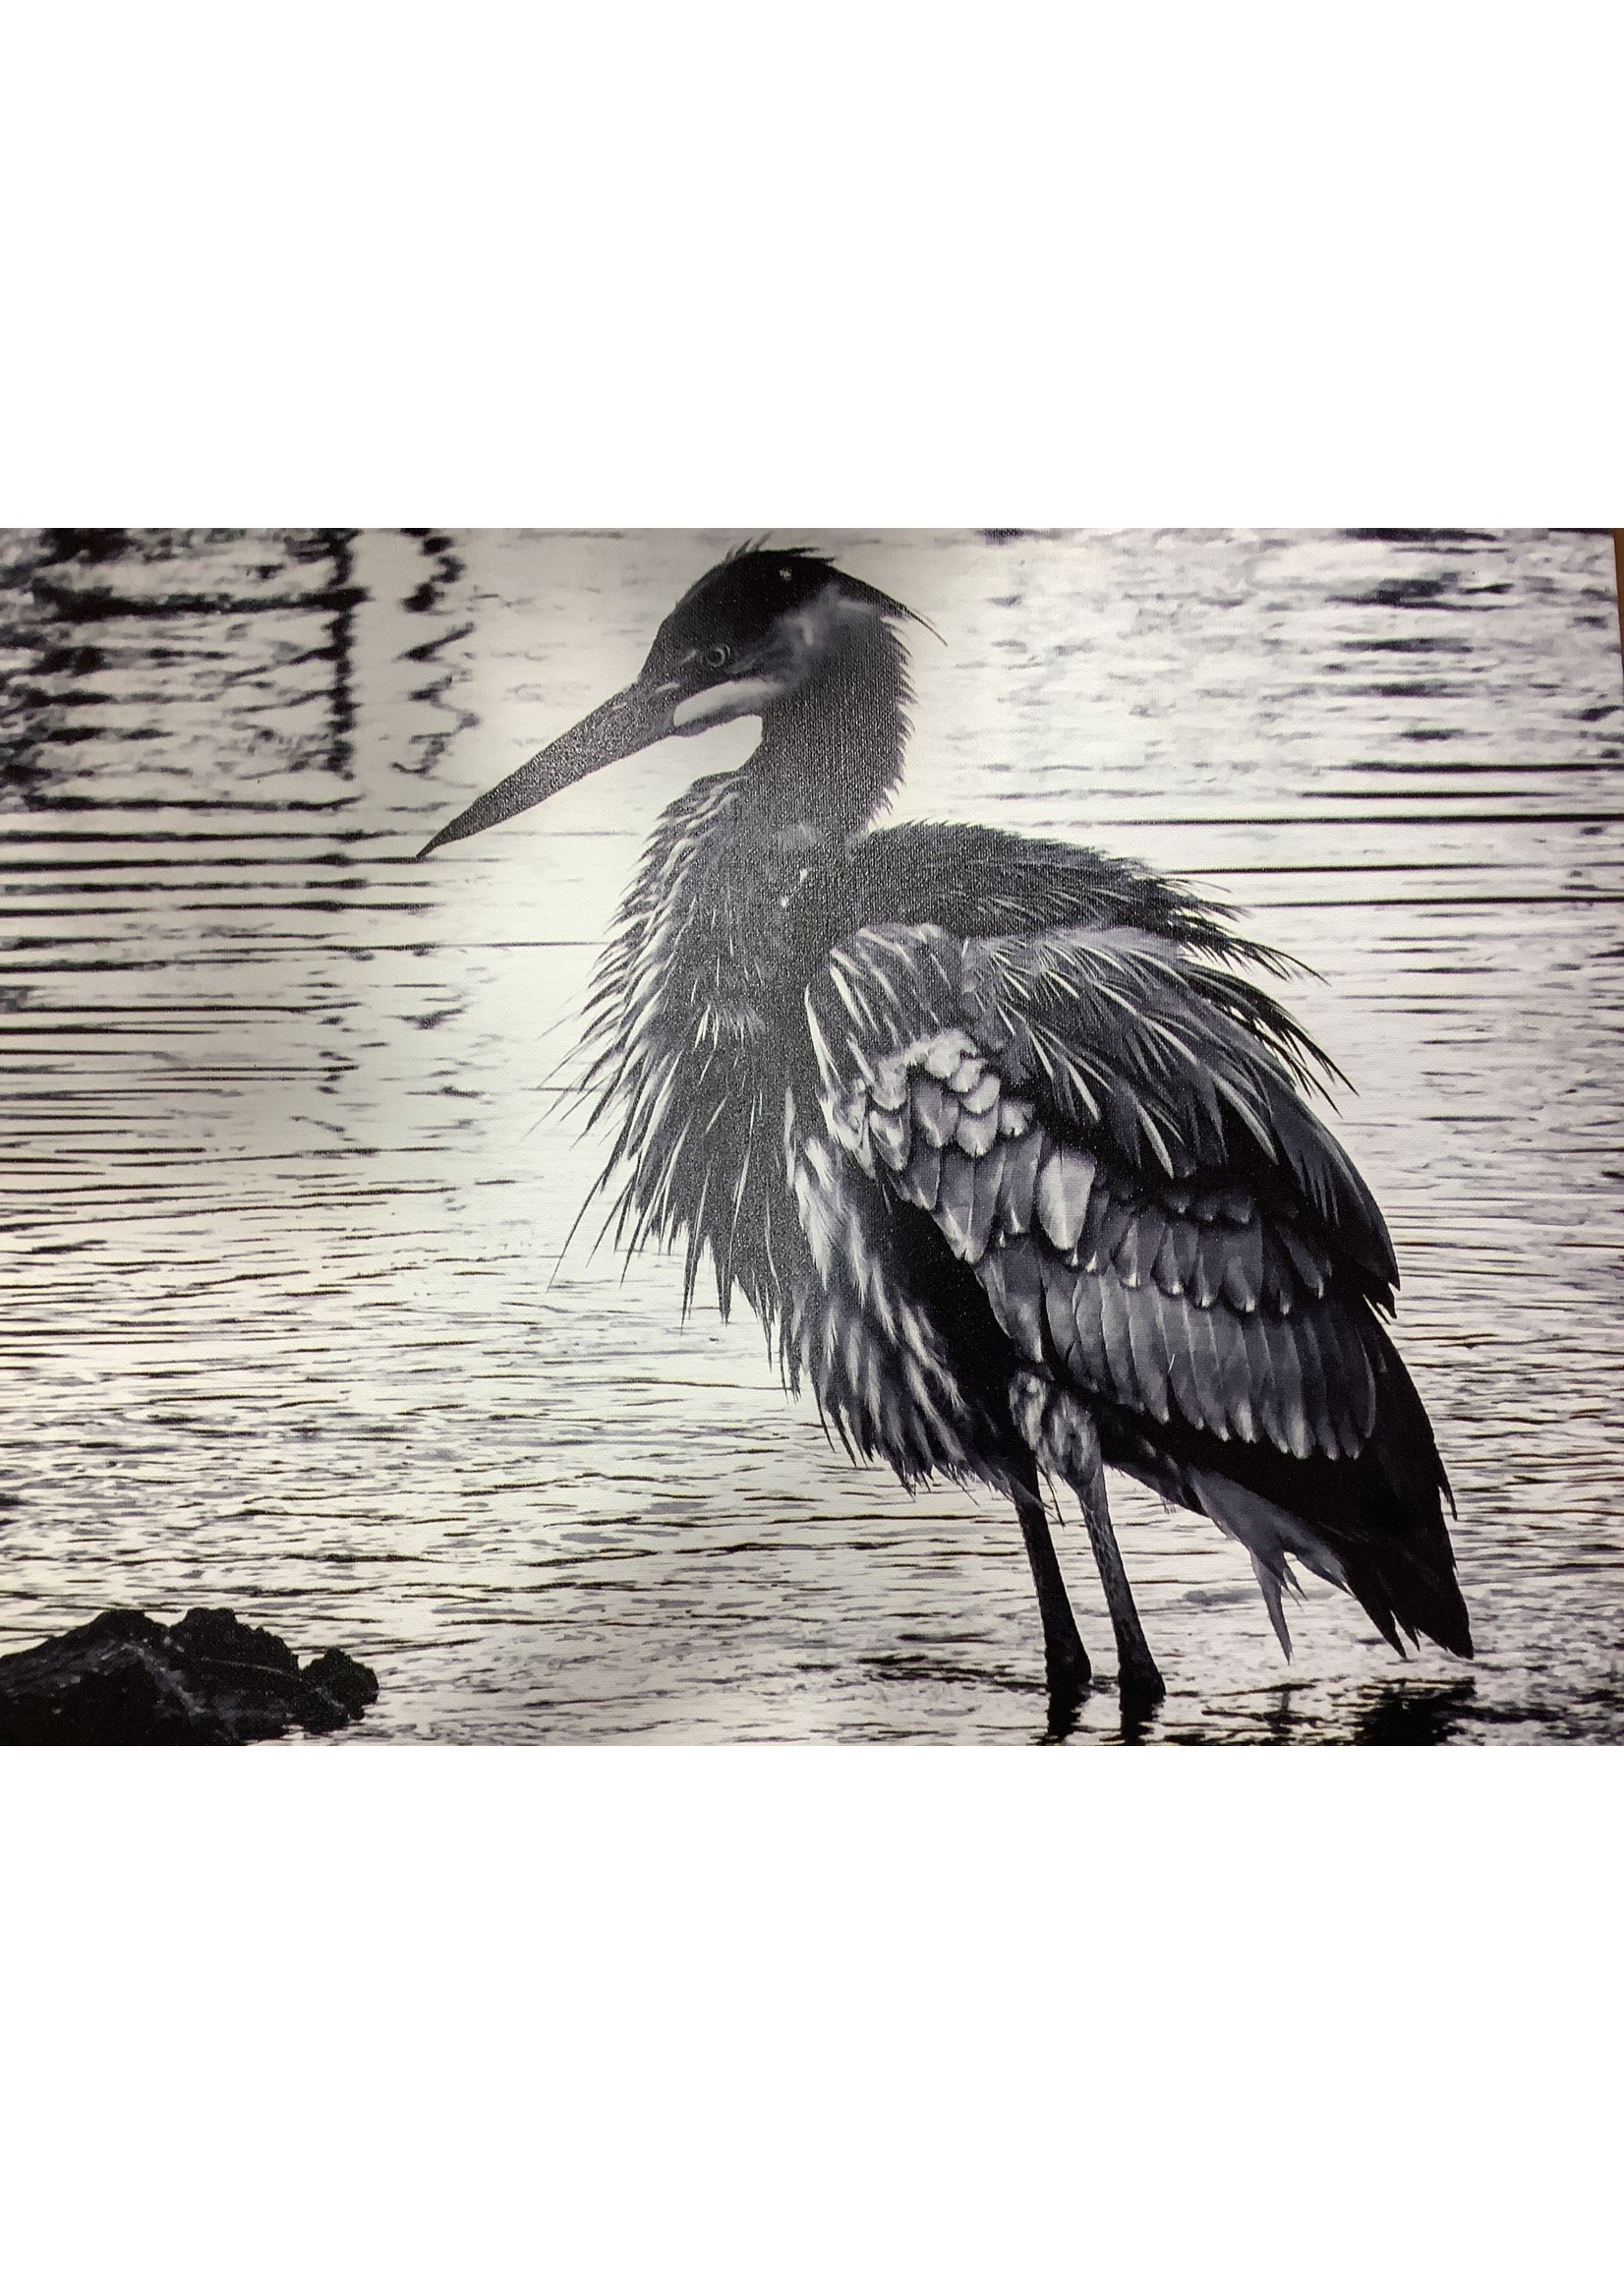 Old Wood Delaware OW Canvas Wall Art - Black and White Single Crane 20x26